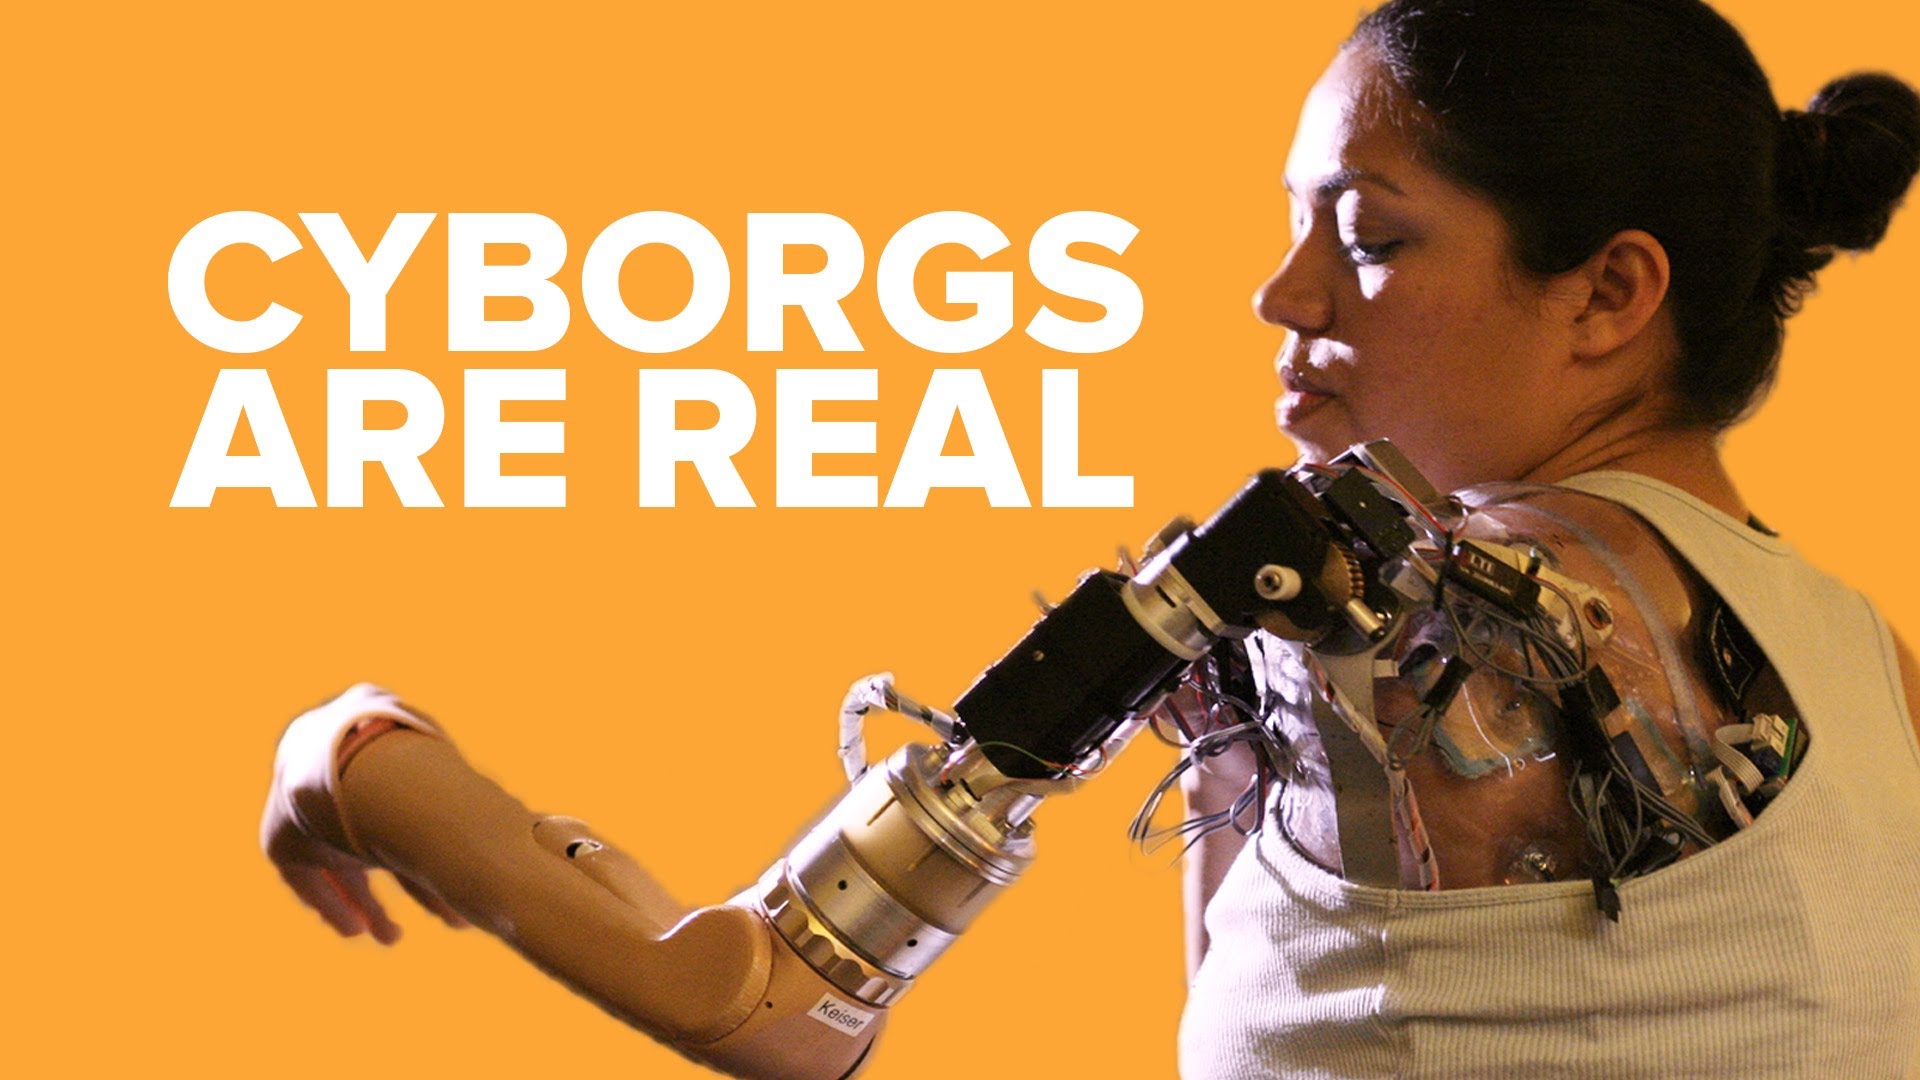 Real Life Cyborgs You Didn't Know Existed - YouTube